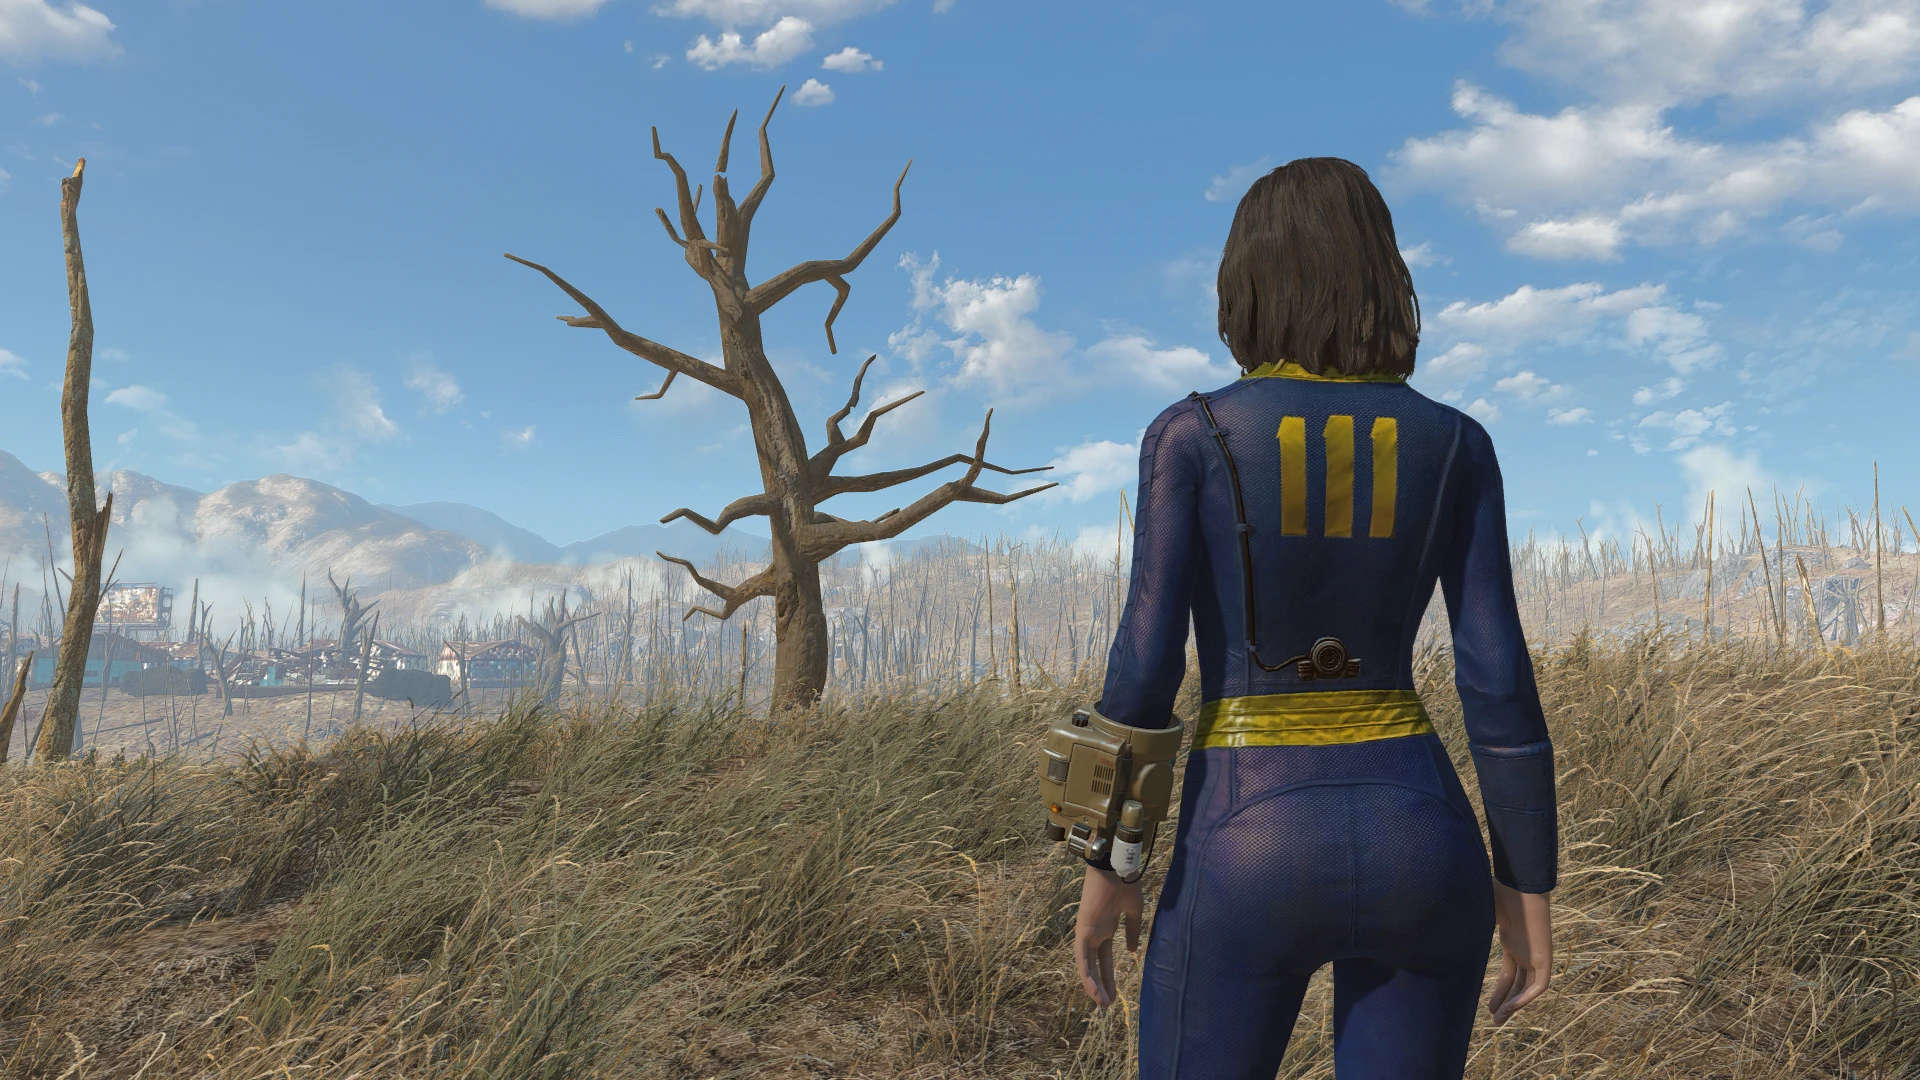 where to get good power suite fallout 4